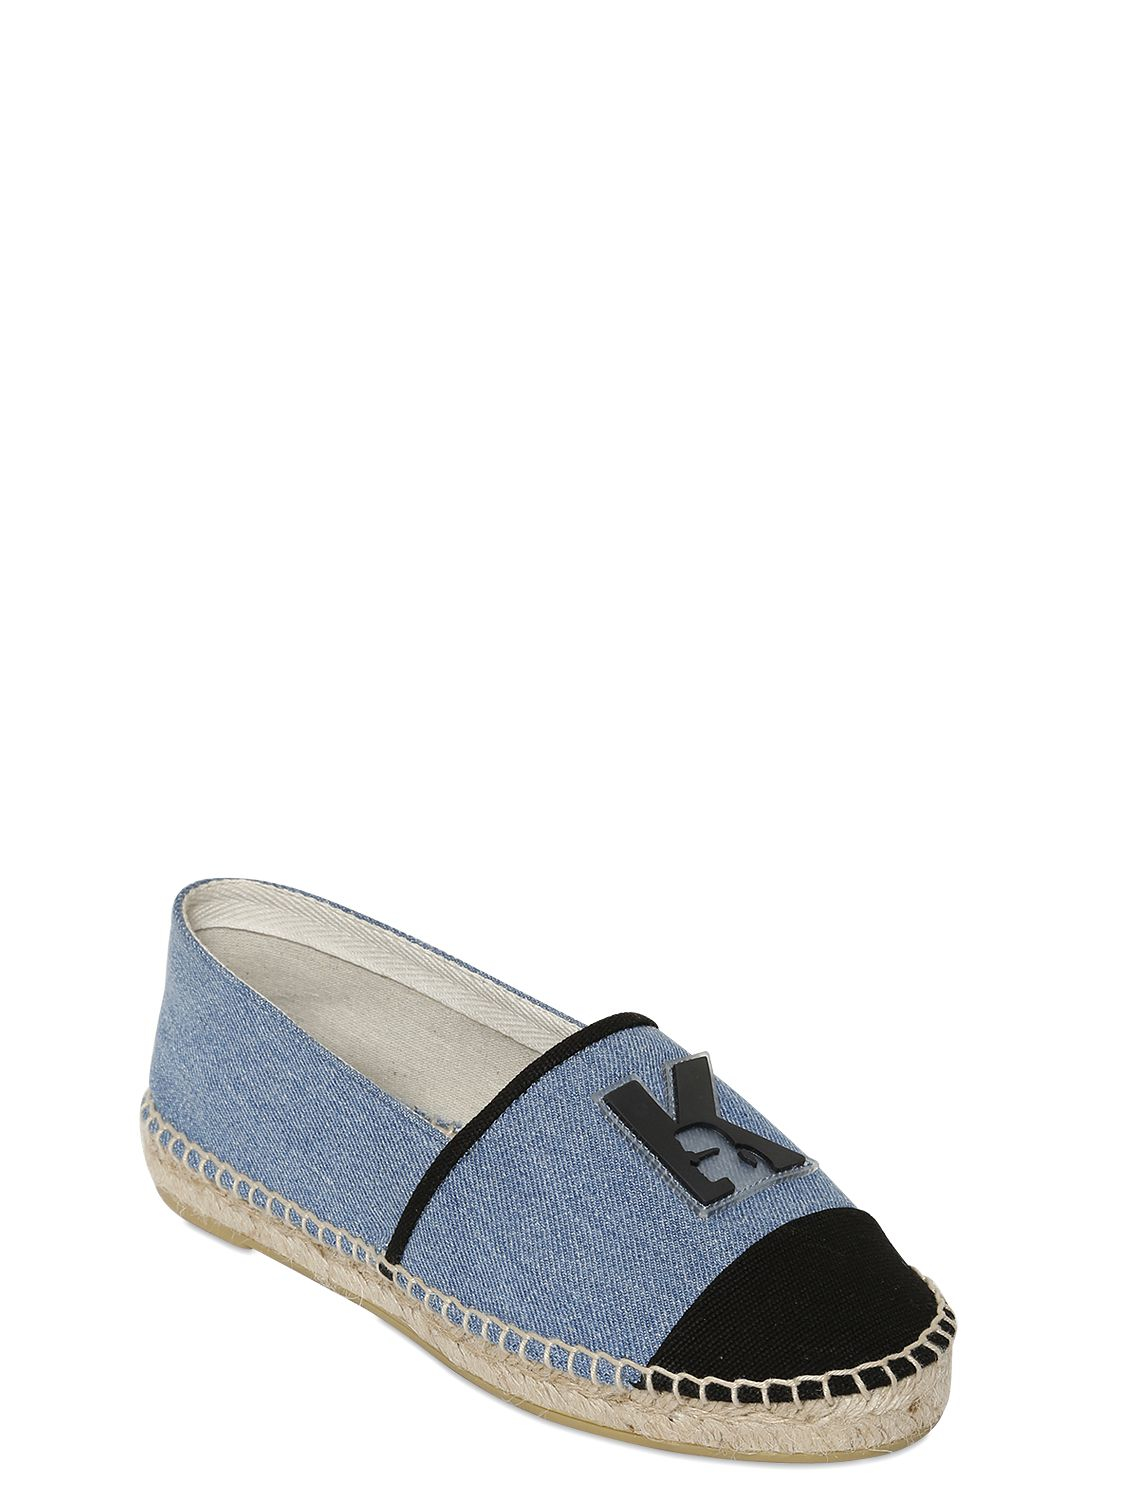 Karl lagerfeld K Canvas & Leather Espadrilles in Blue | Lyst